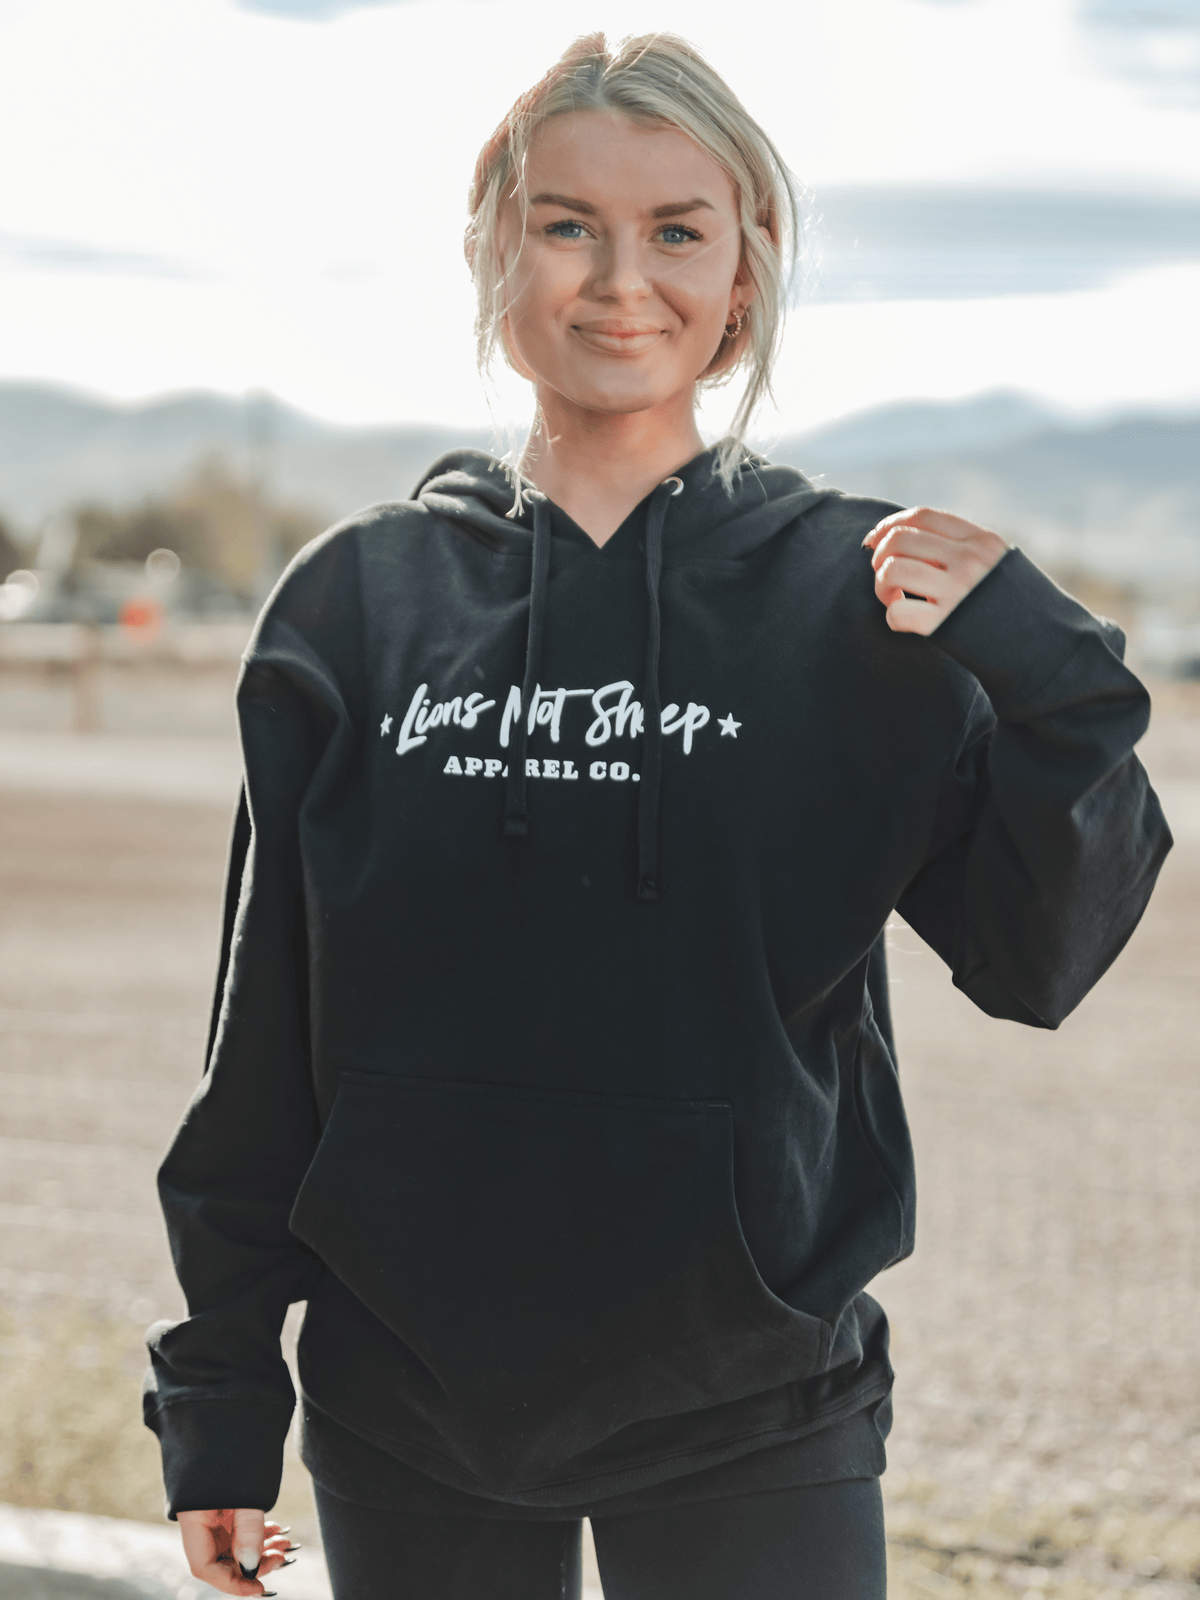 LIONS NOT SHEEP APPAREL CO. Pullover Unisex Hoodie - Lions Not Sheep ®